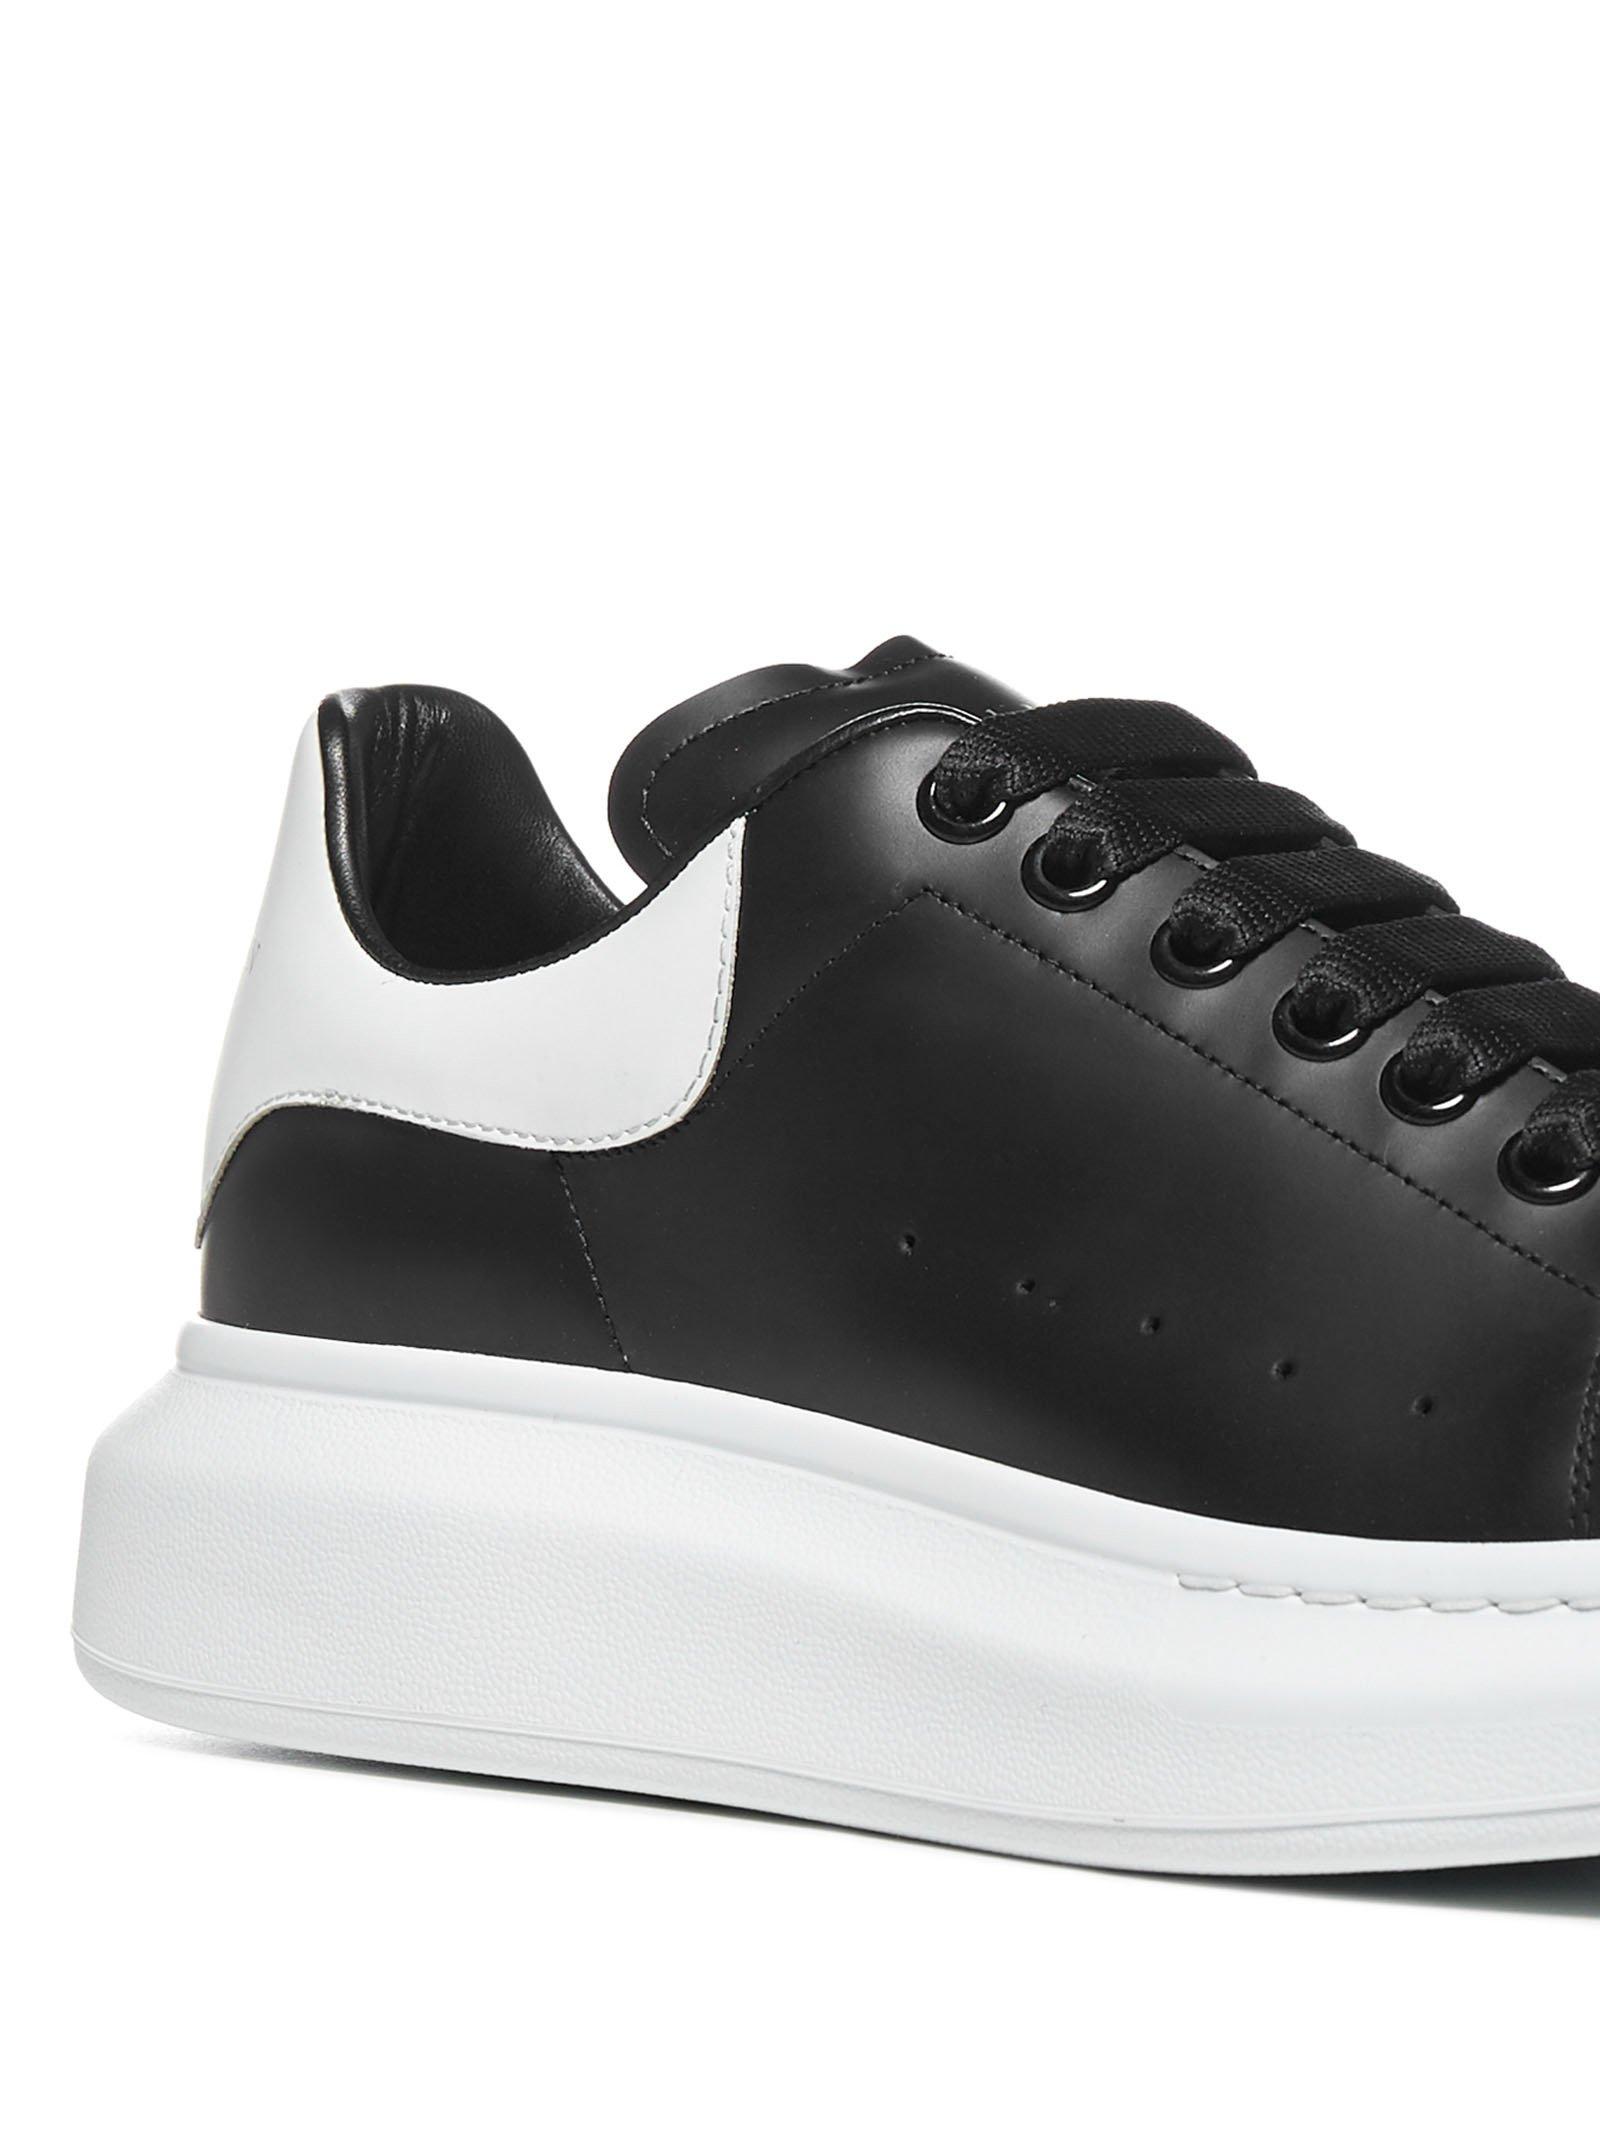 Alexander McQueen Leather Oversized Sole Sneakers Black/white for 